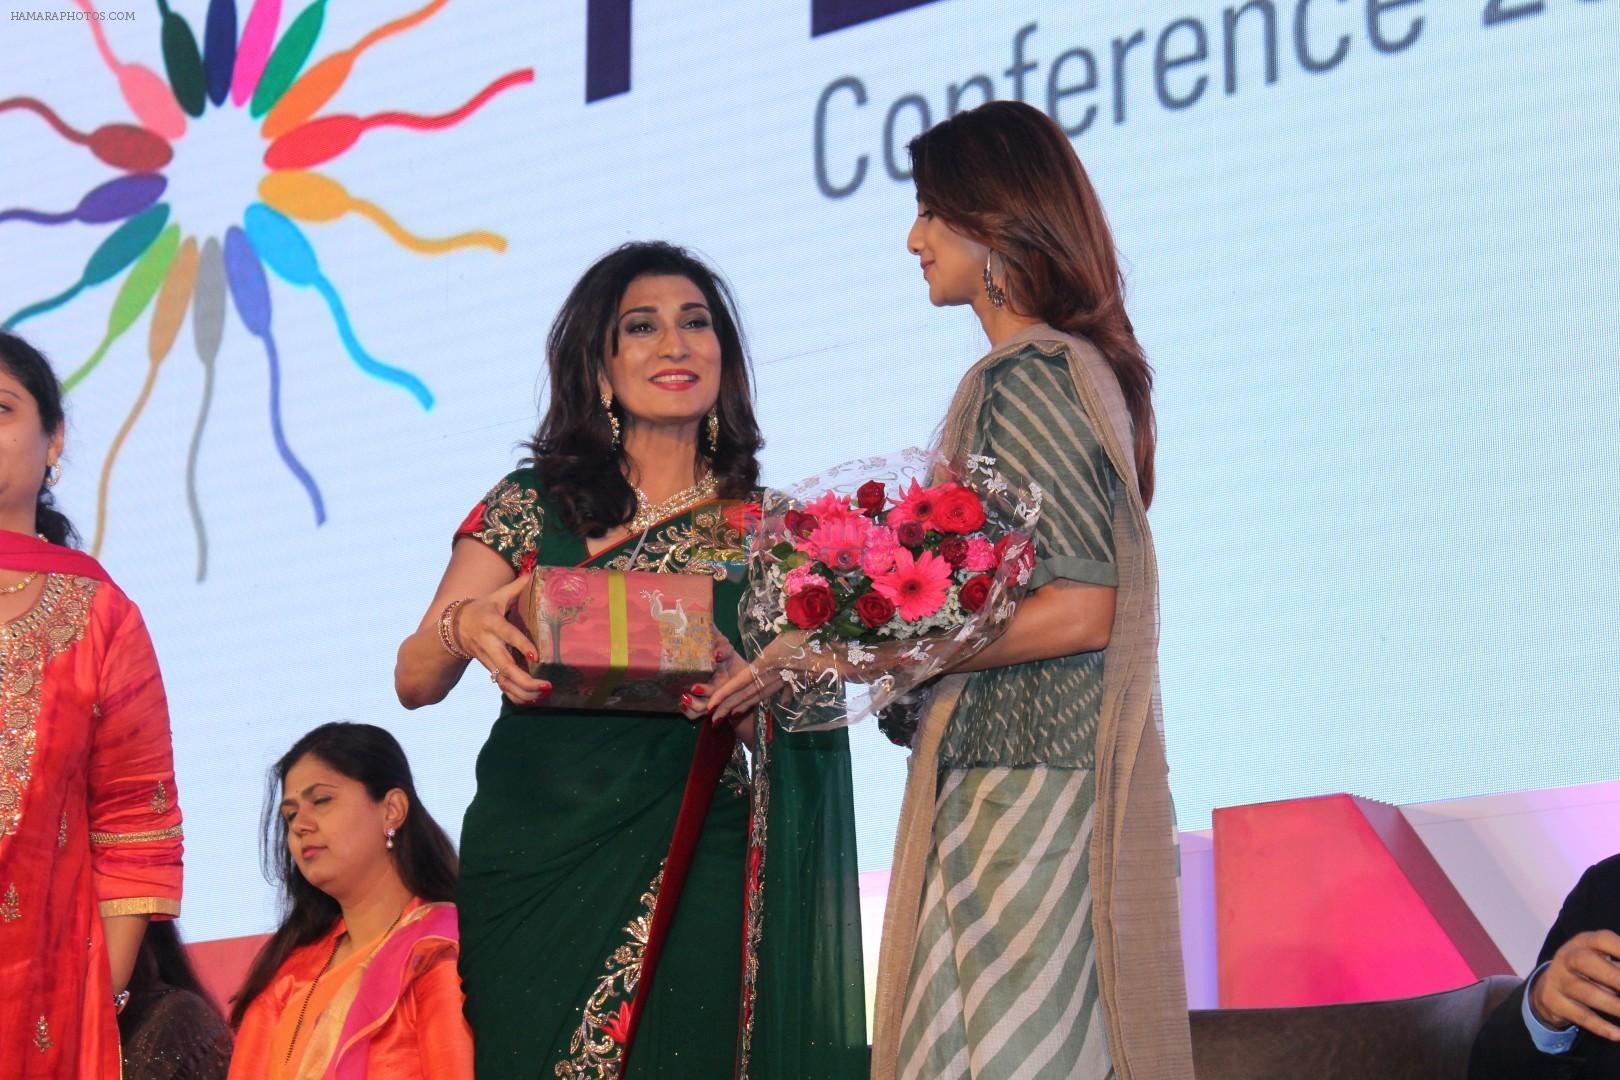 Shilpa Shetty Inaugurate A Movement On Quality Maternal Care In India on 18th Nov 2017